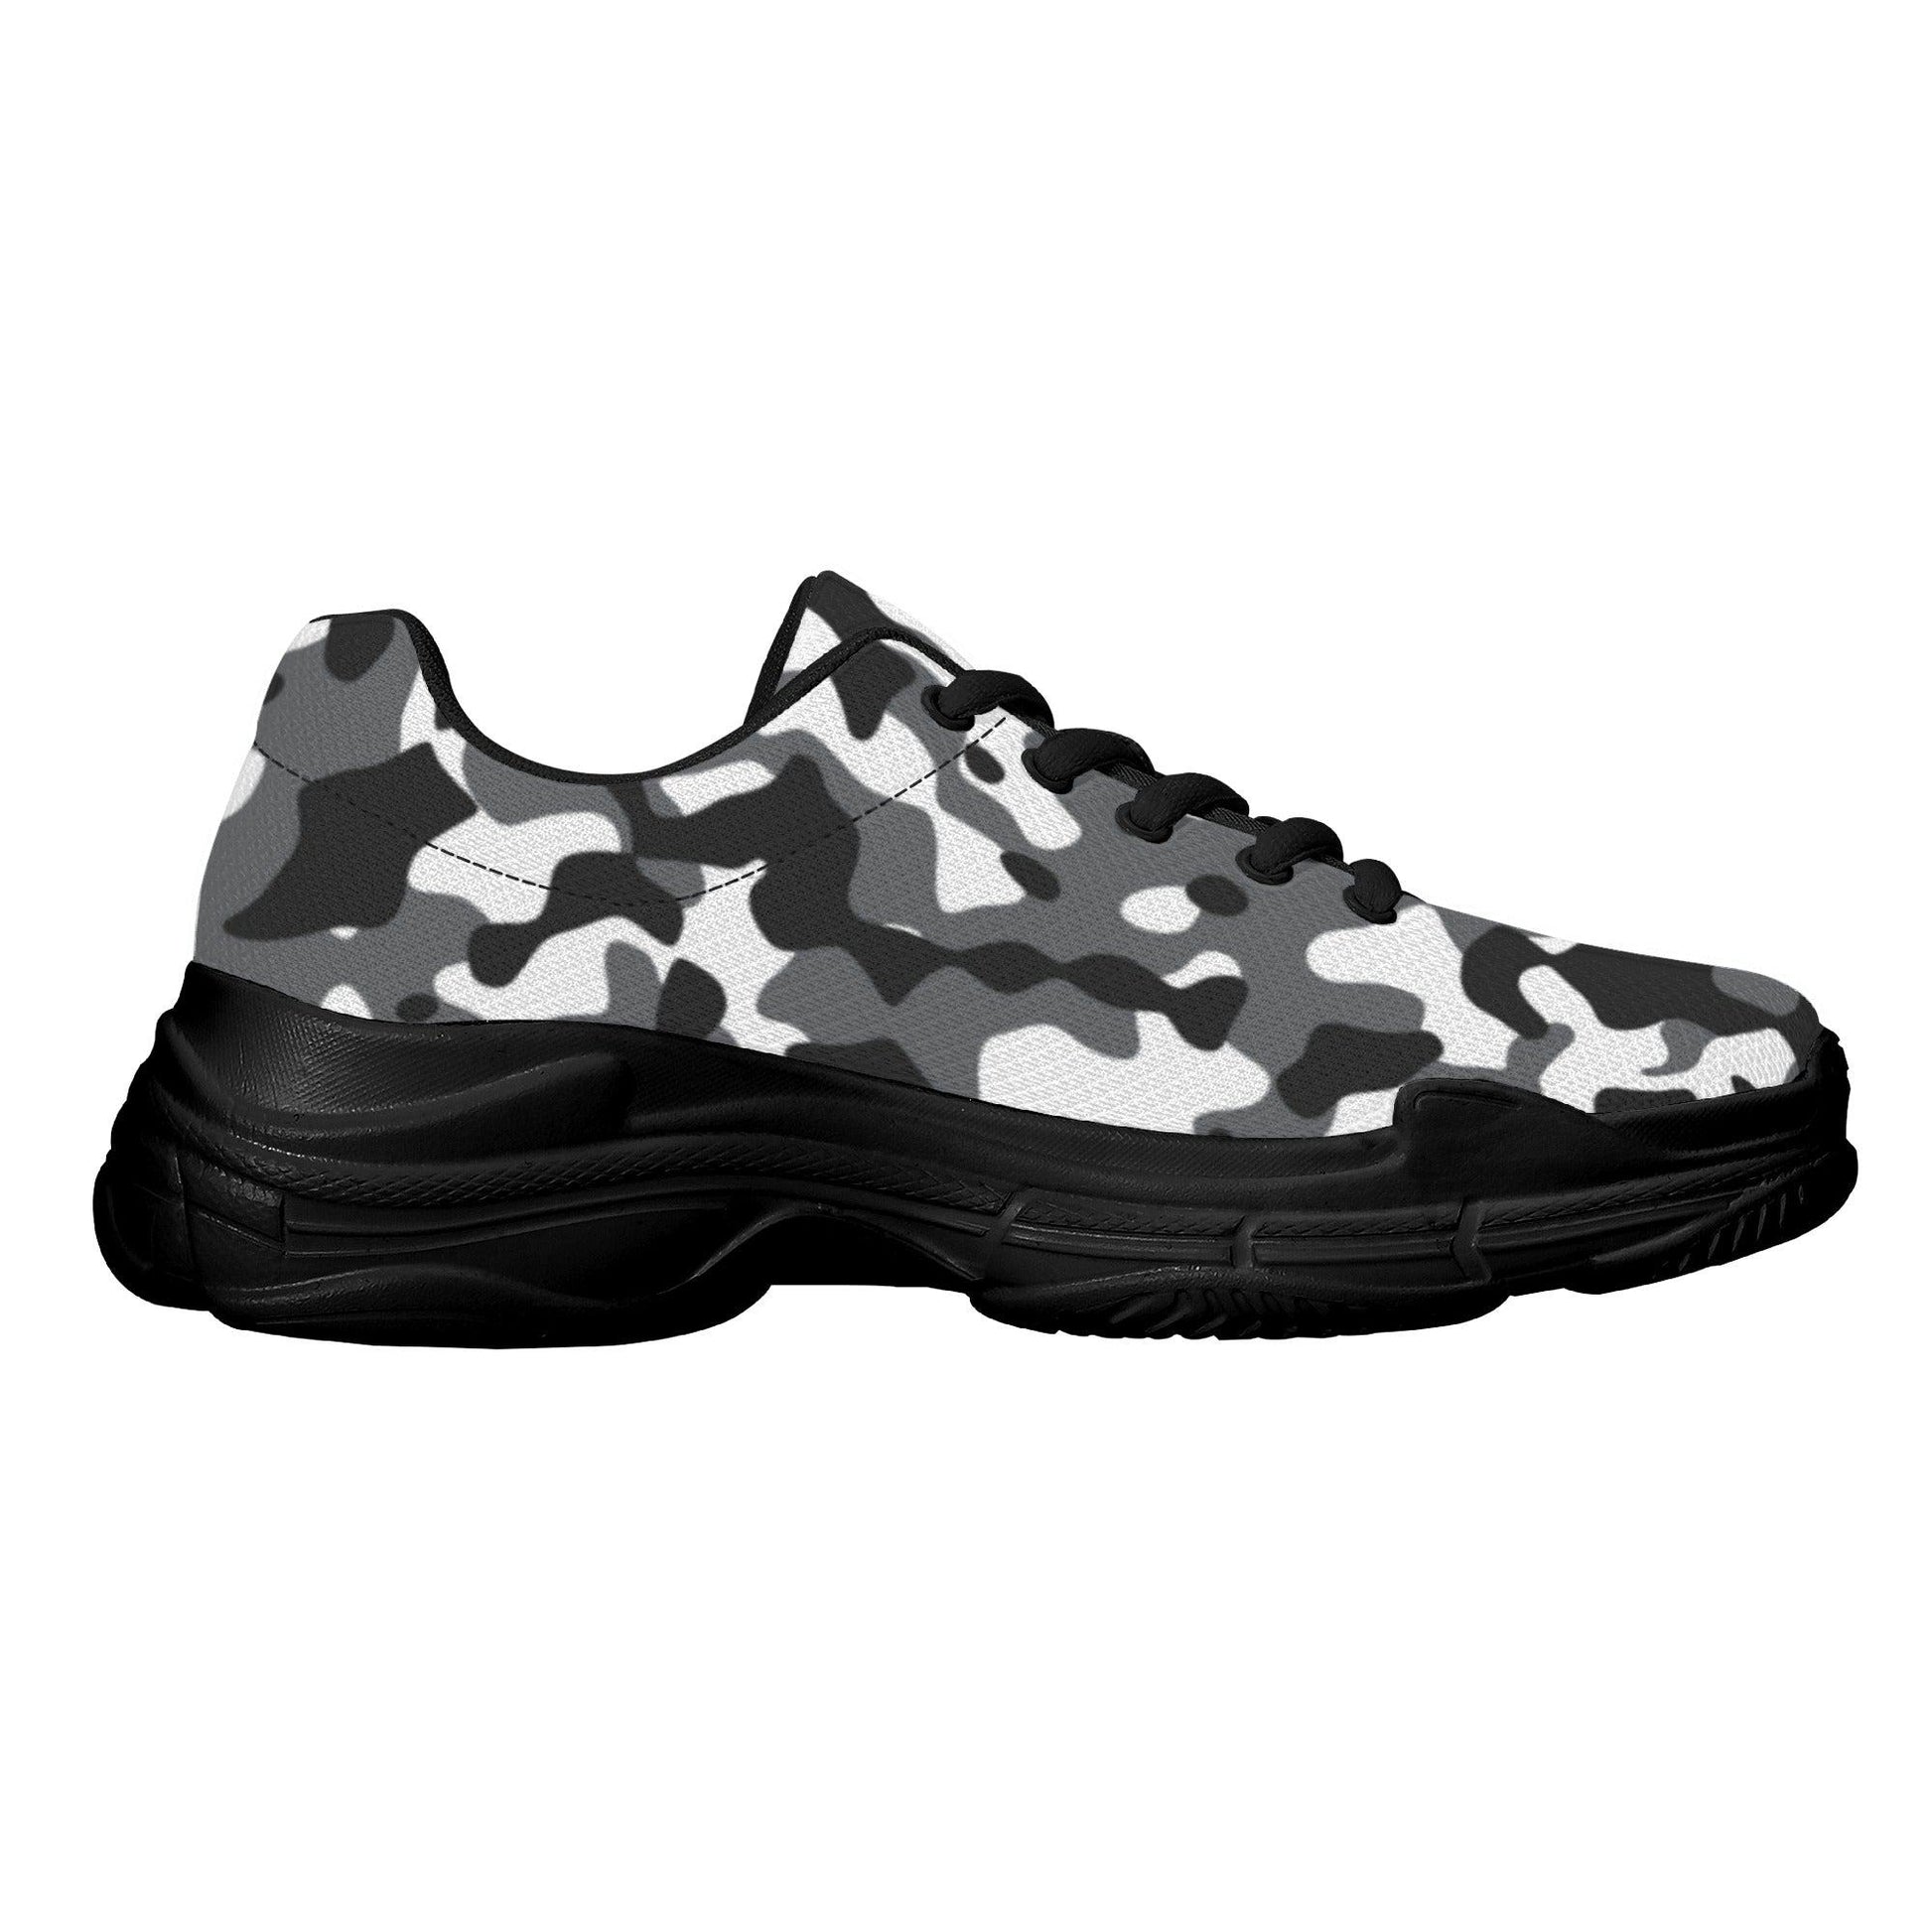 Black Camouflage Chunky Sneakers Schuhe 79.99 Black, Camouflage, Chunky, Herren, Schuhe JLR Design